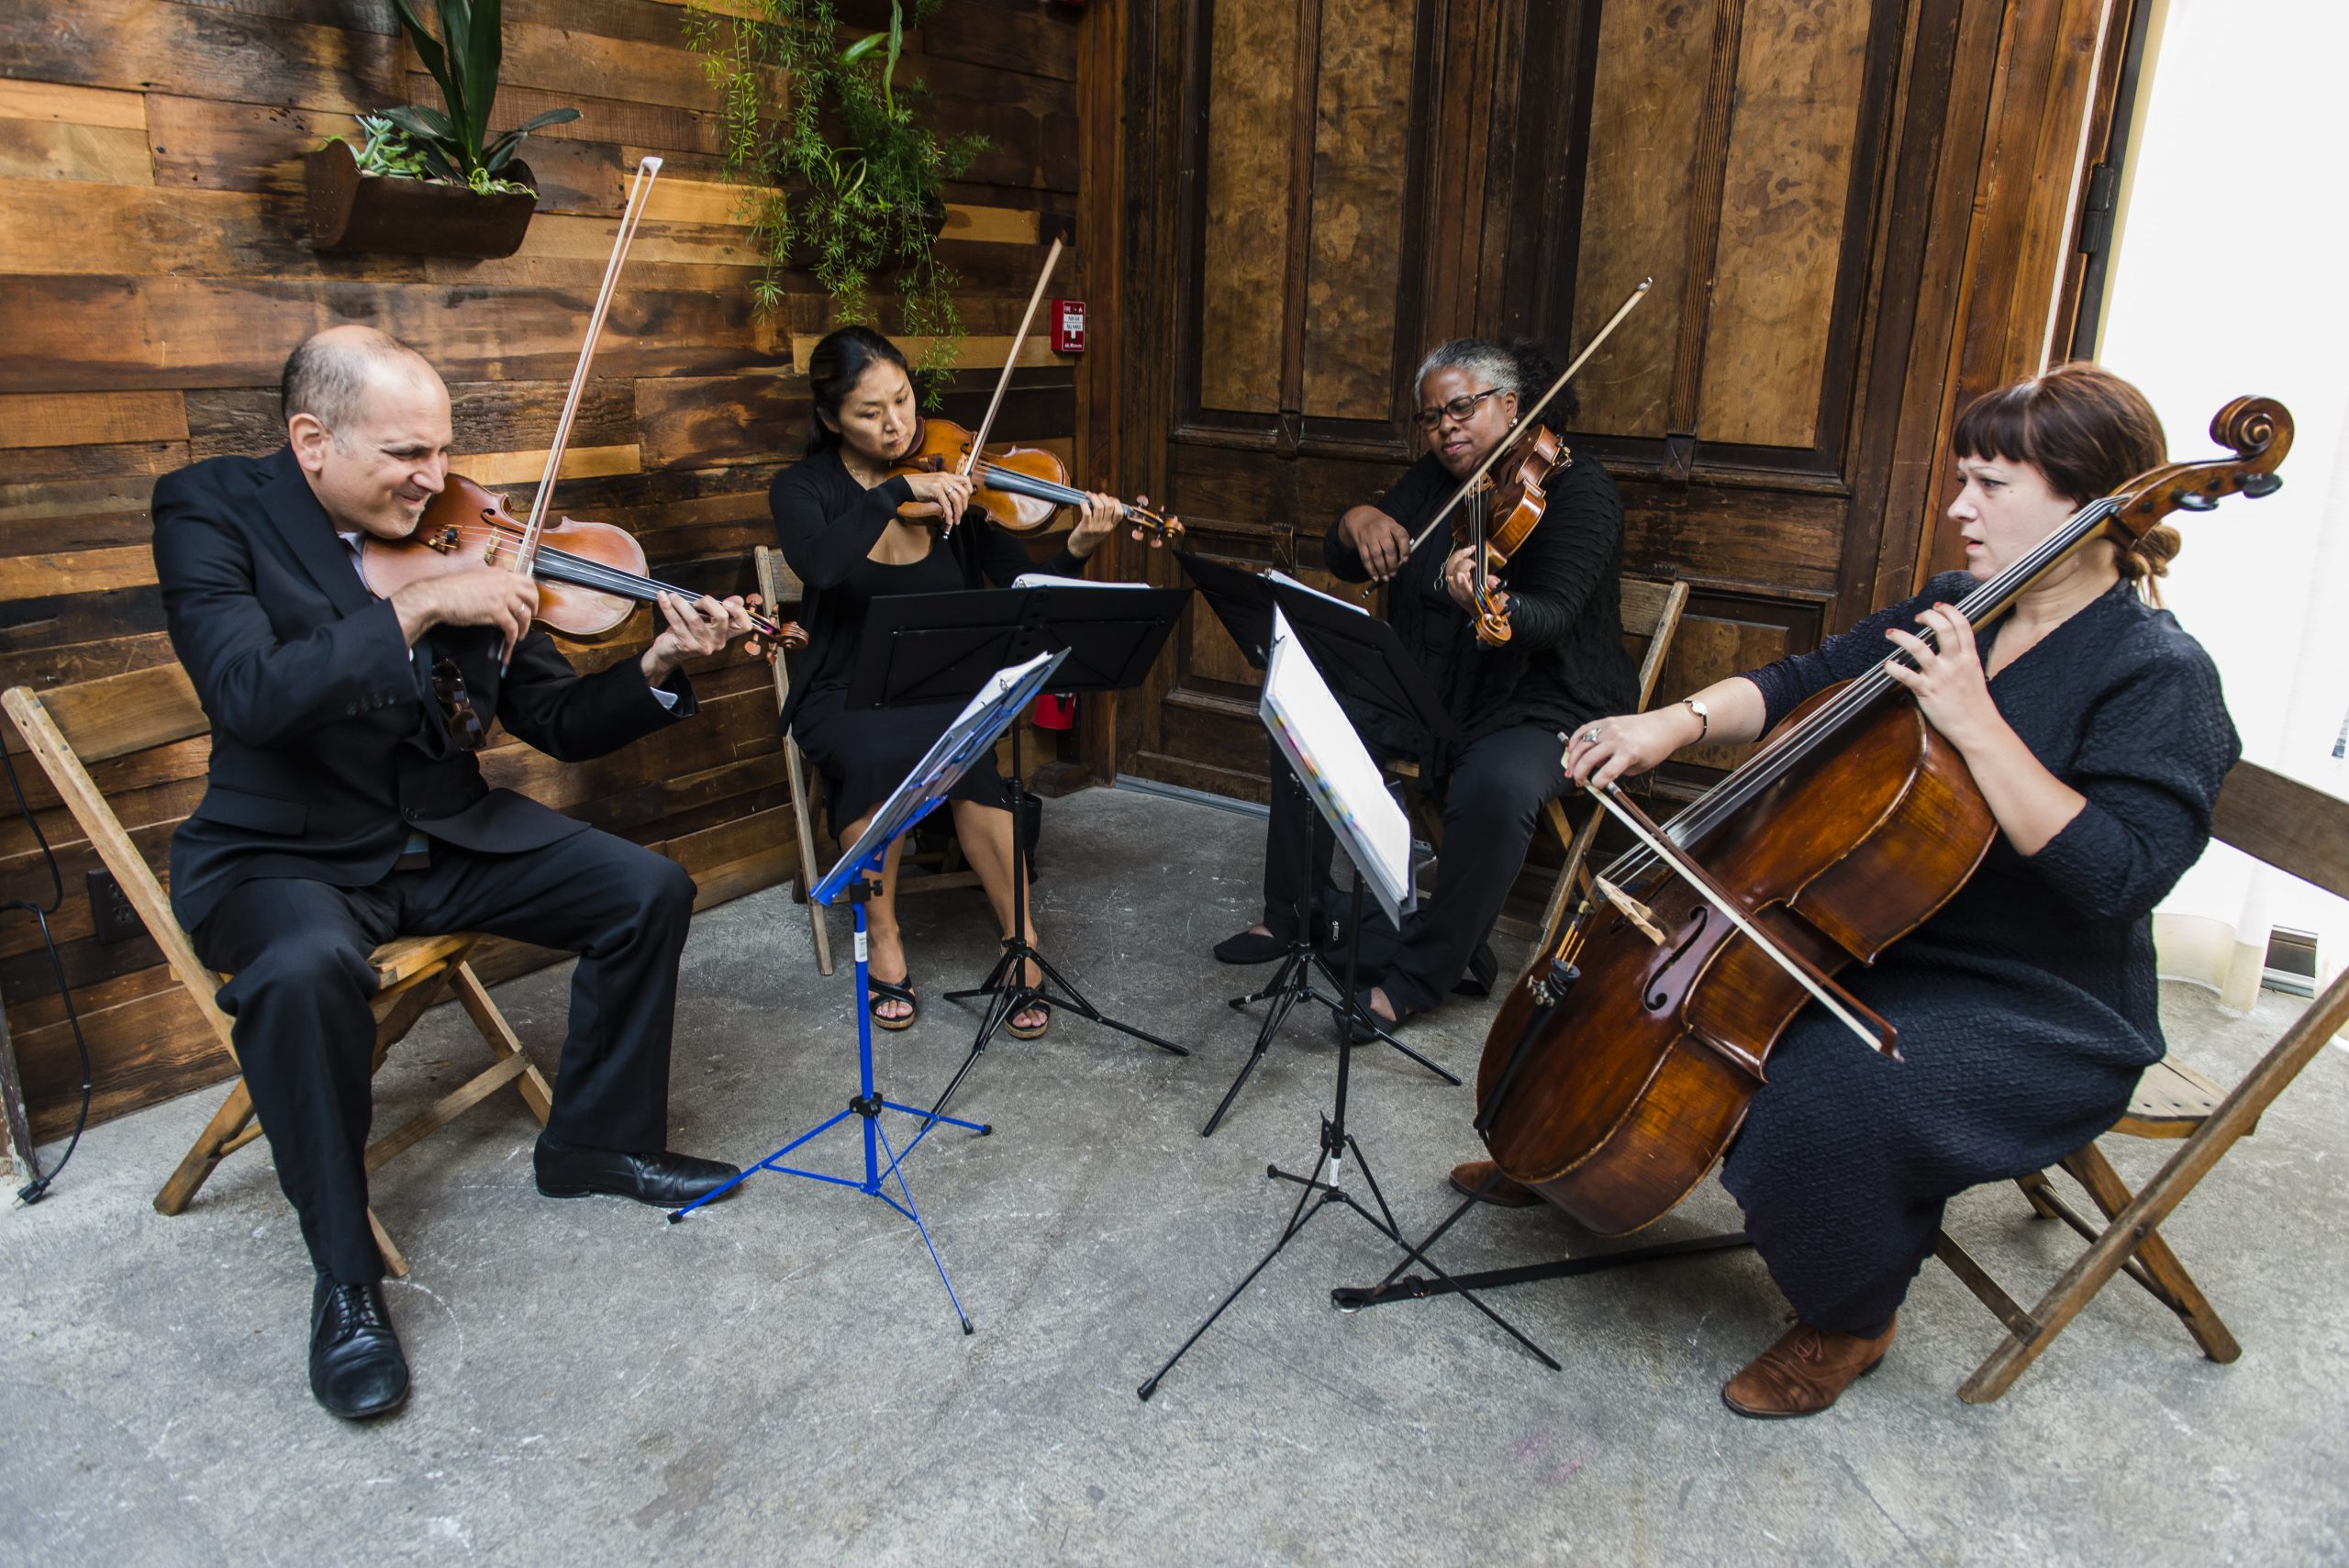 String quartet in New York playing pop and rock music